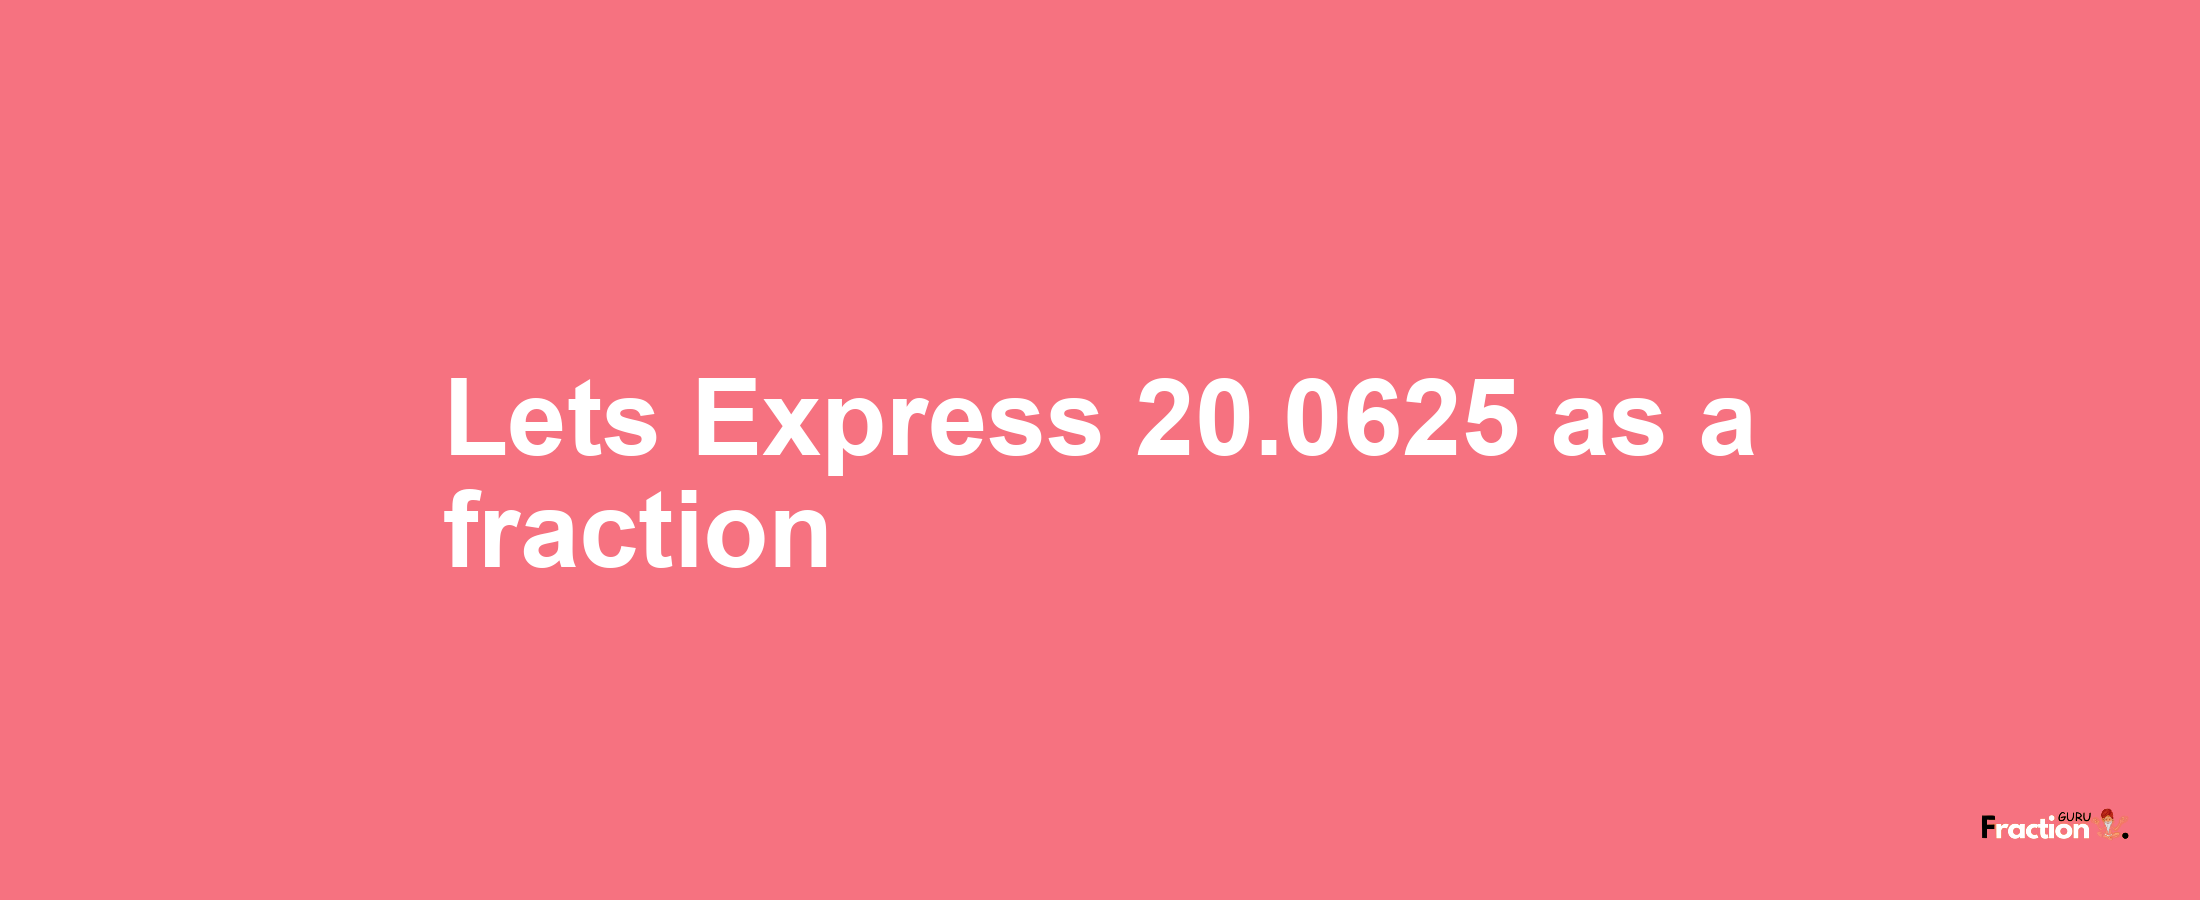 Lets Express 20.0625 as afraction